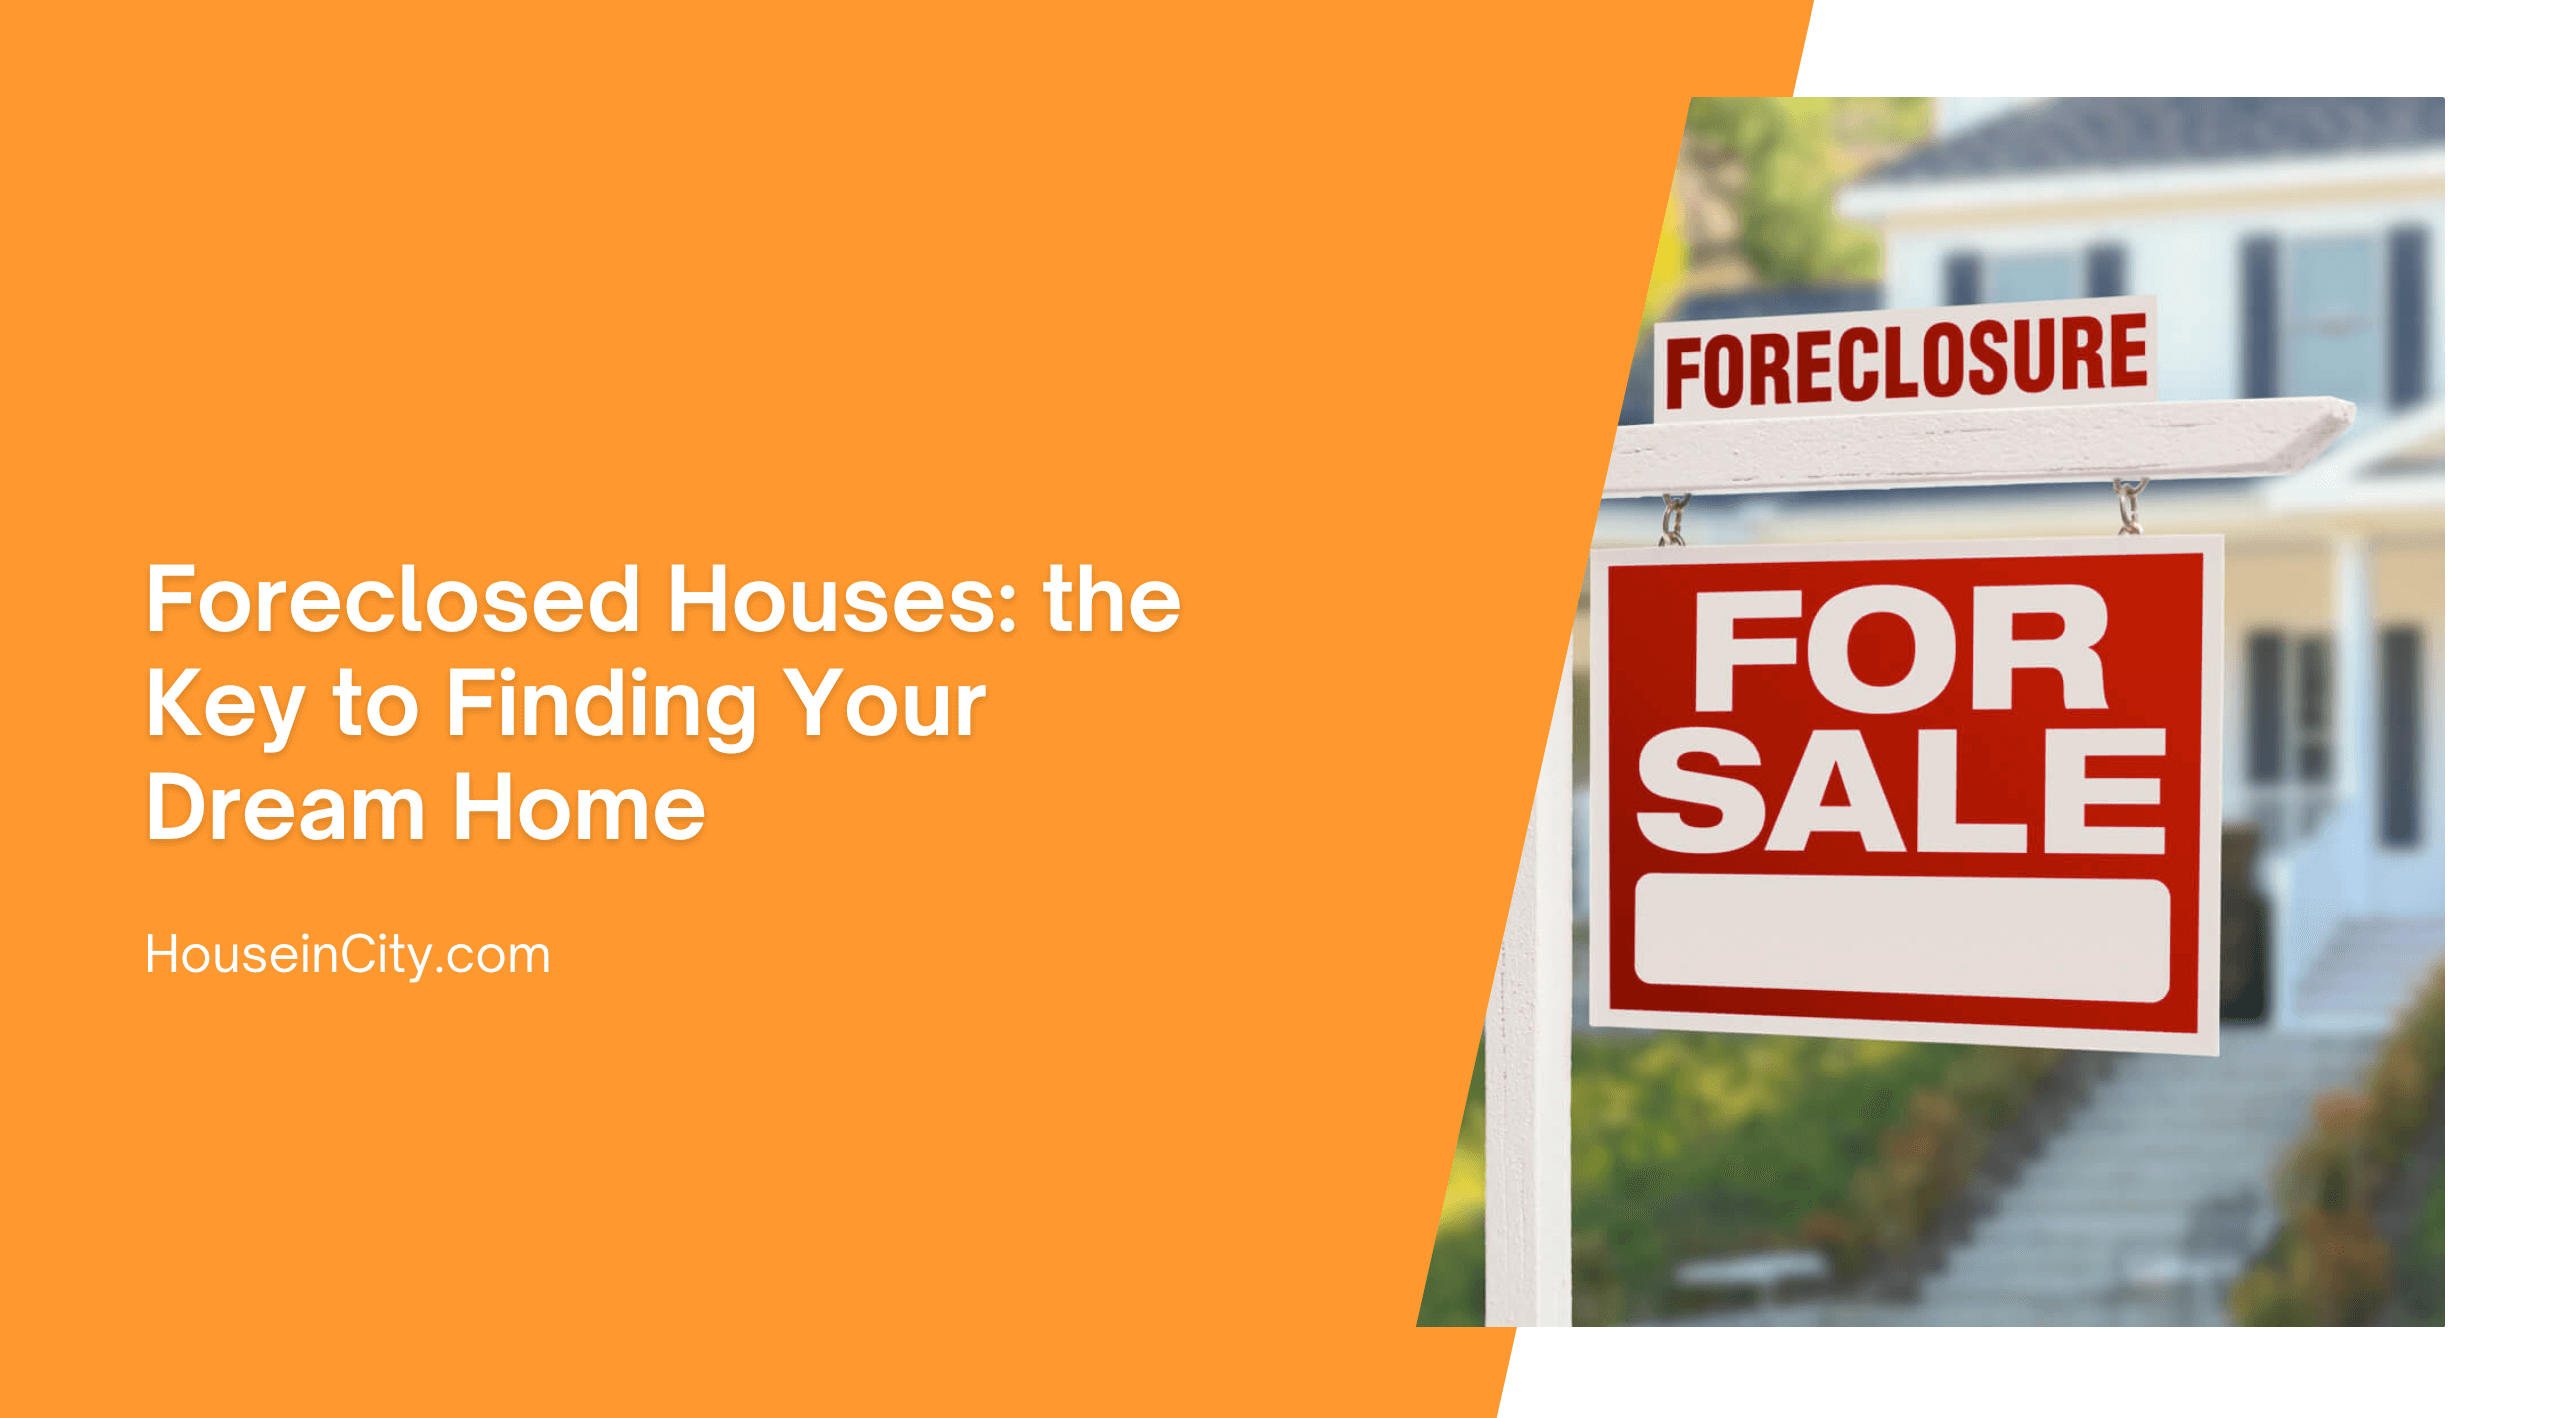 Foreclosed Houses: the Key to Finding Your Dream Home